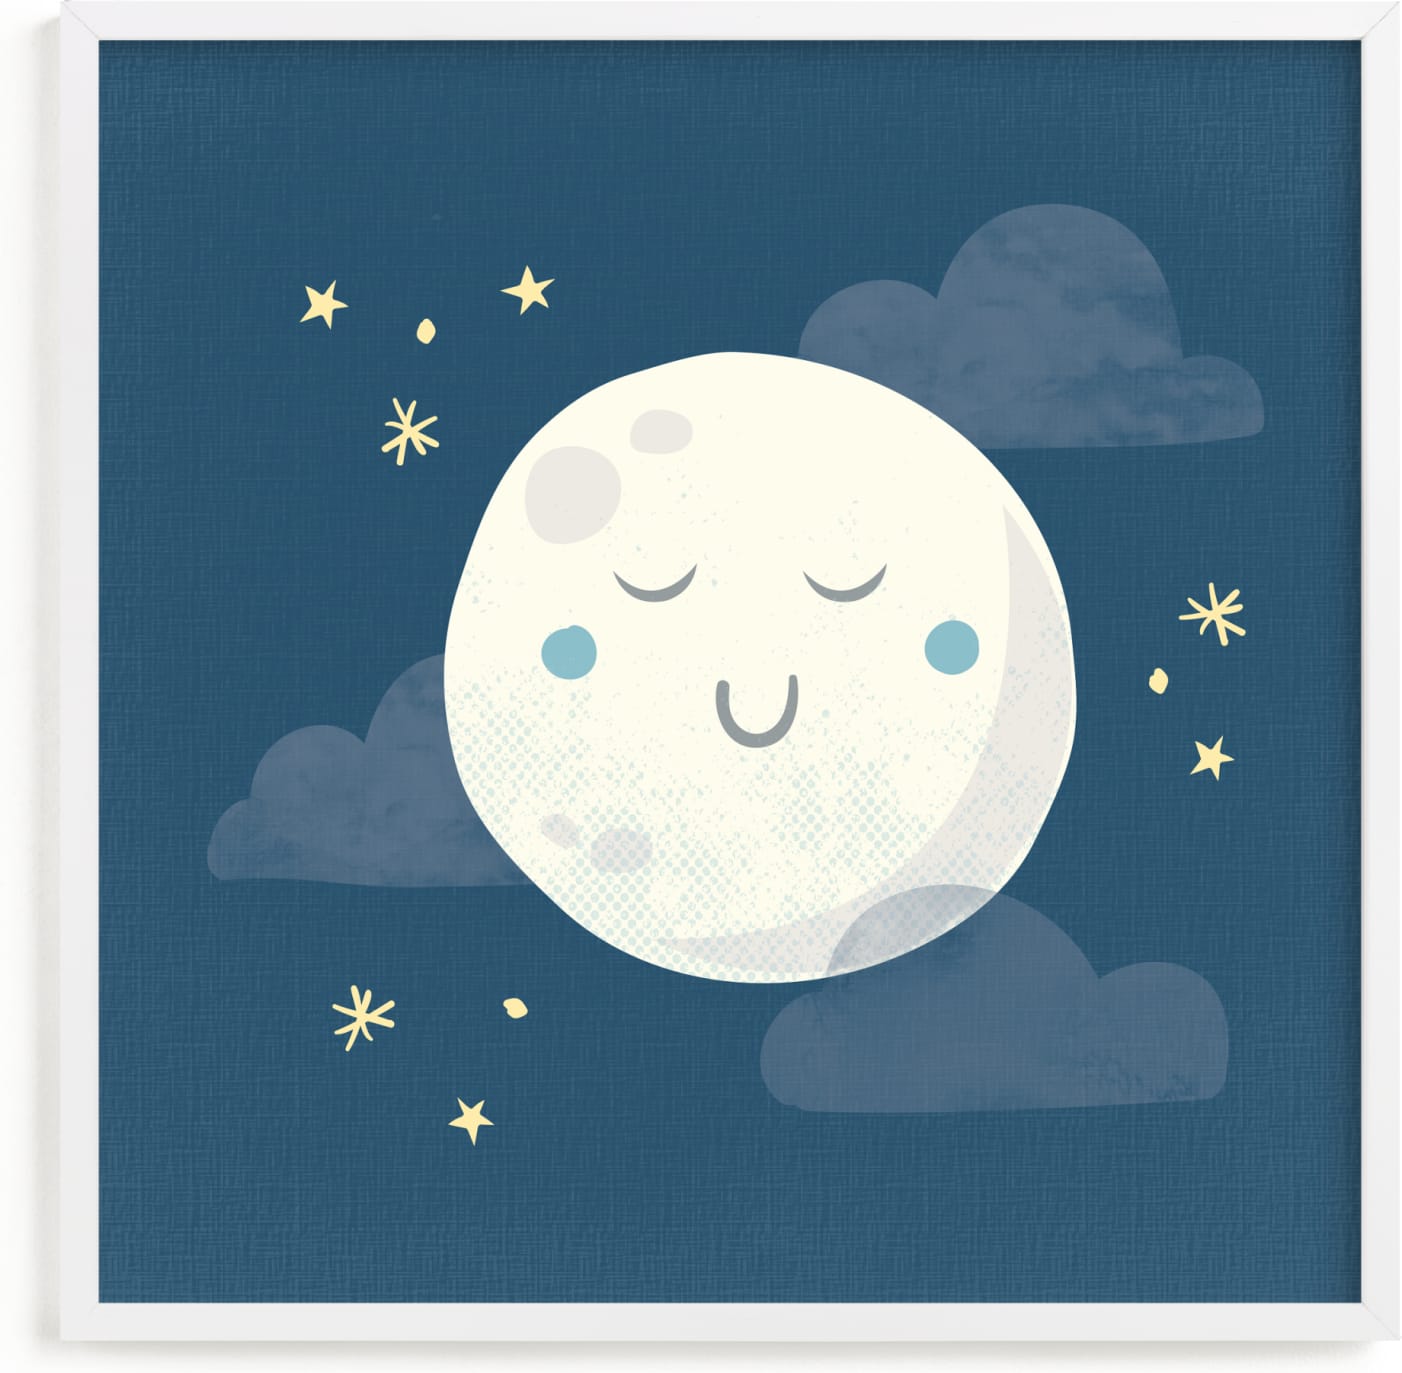 This is a blue art by Annie Holmquist called Goodnight moon.